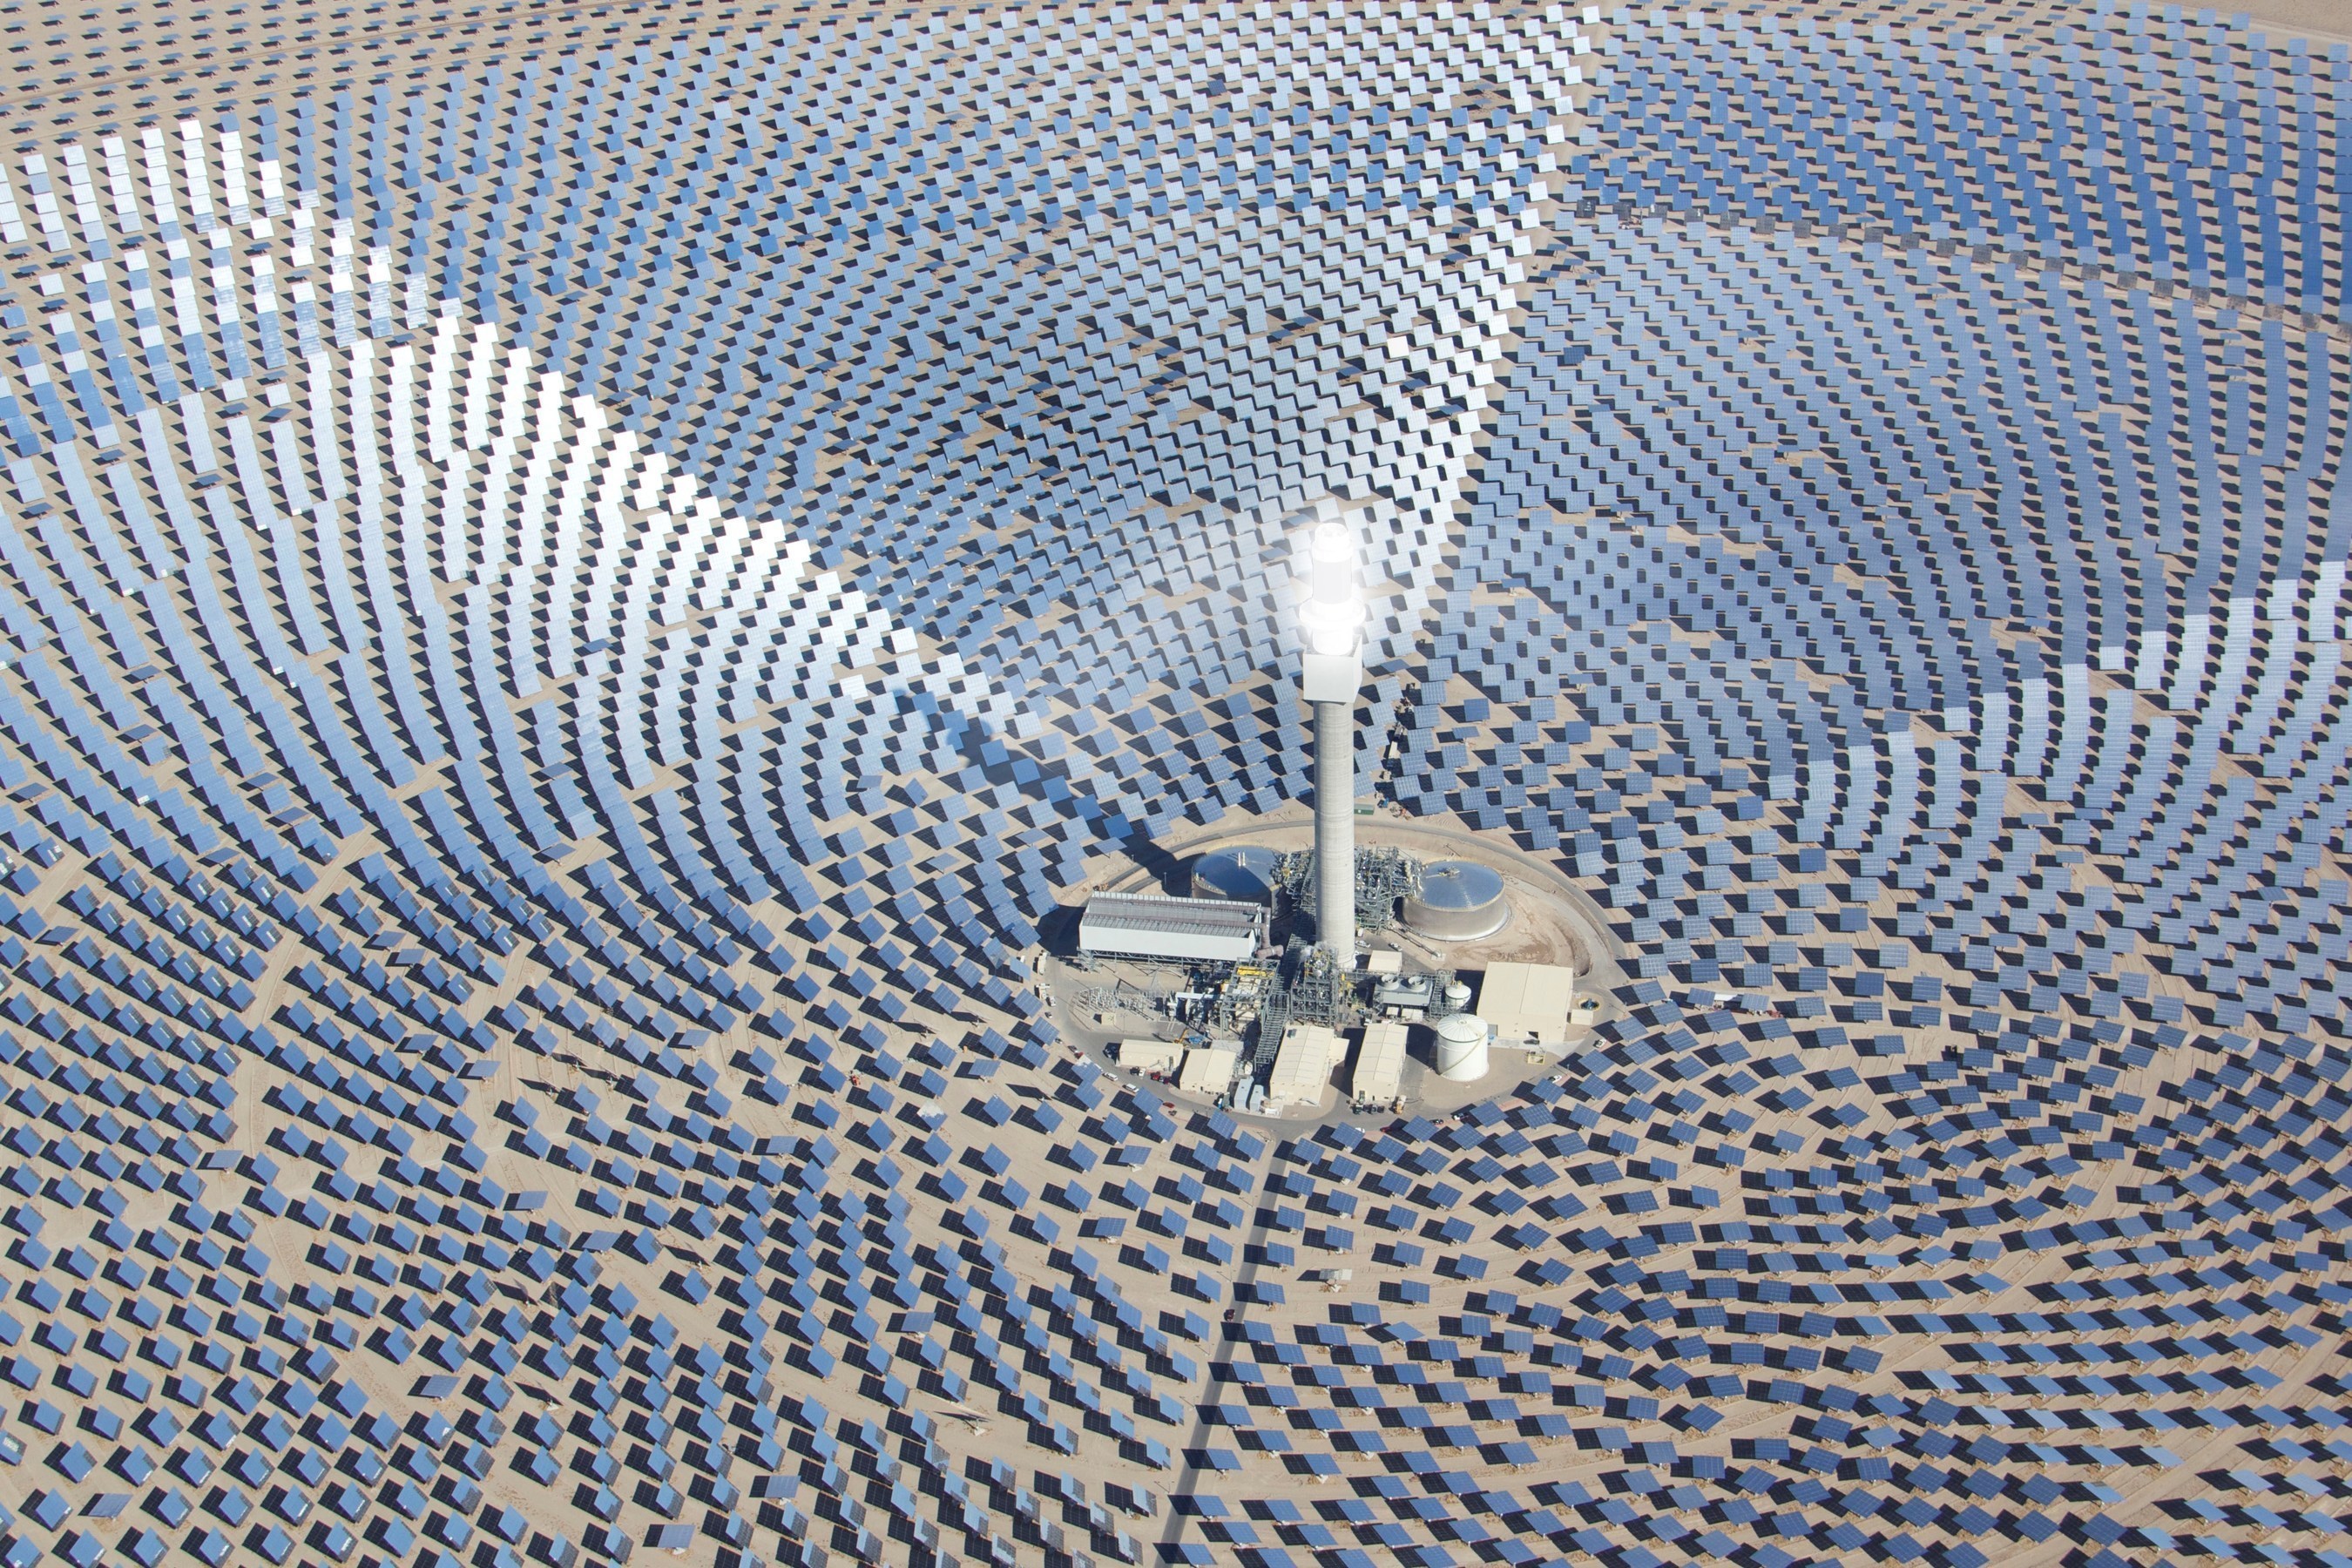 Crescent Dunes Solar Energy Plant is the world's first utility-scale solar thermal facility to feature advanced molten salt power tower energy storage capabilities.